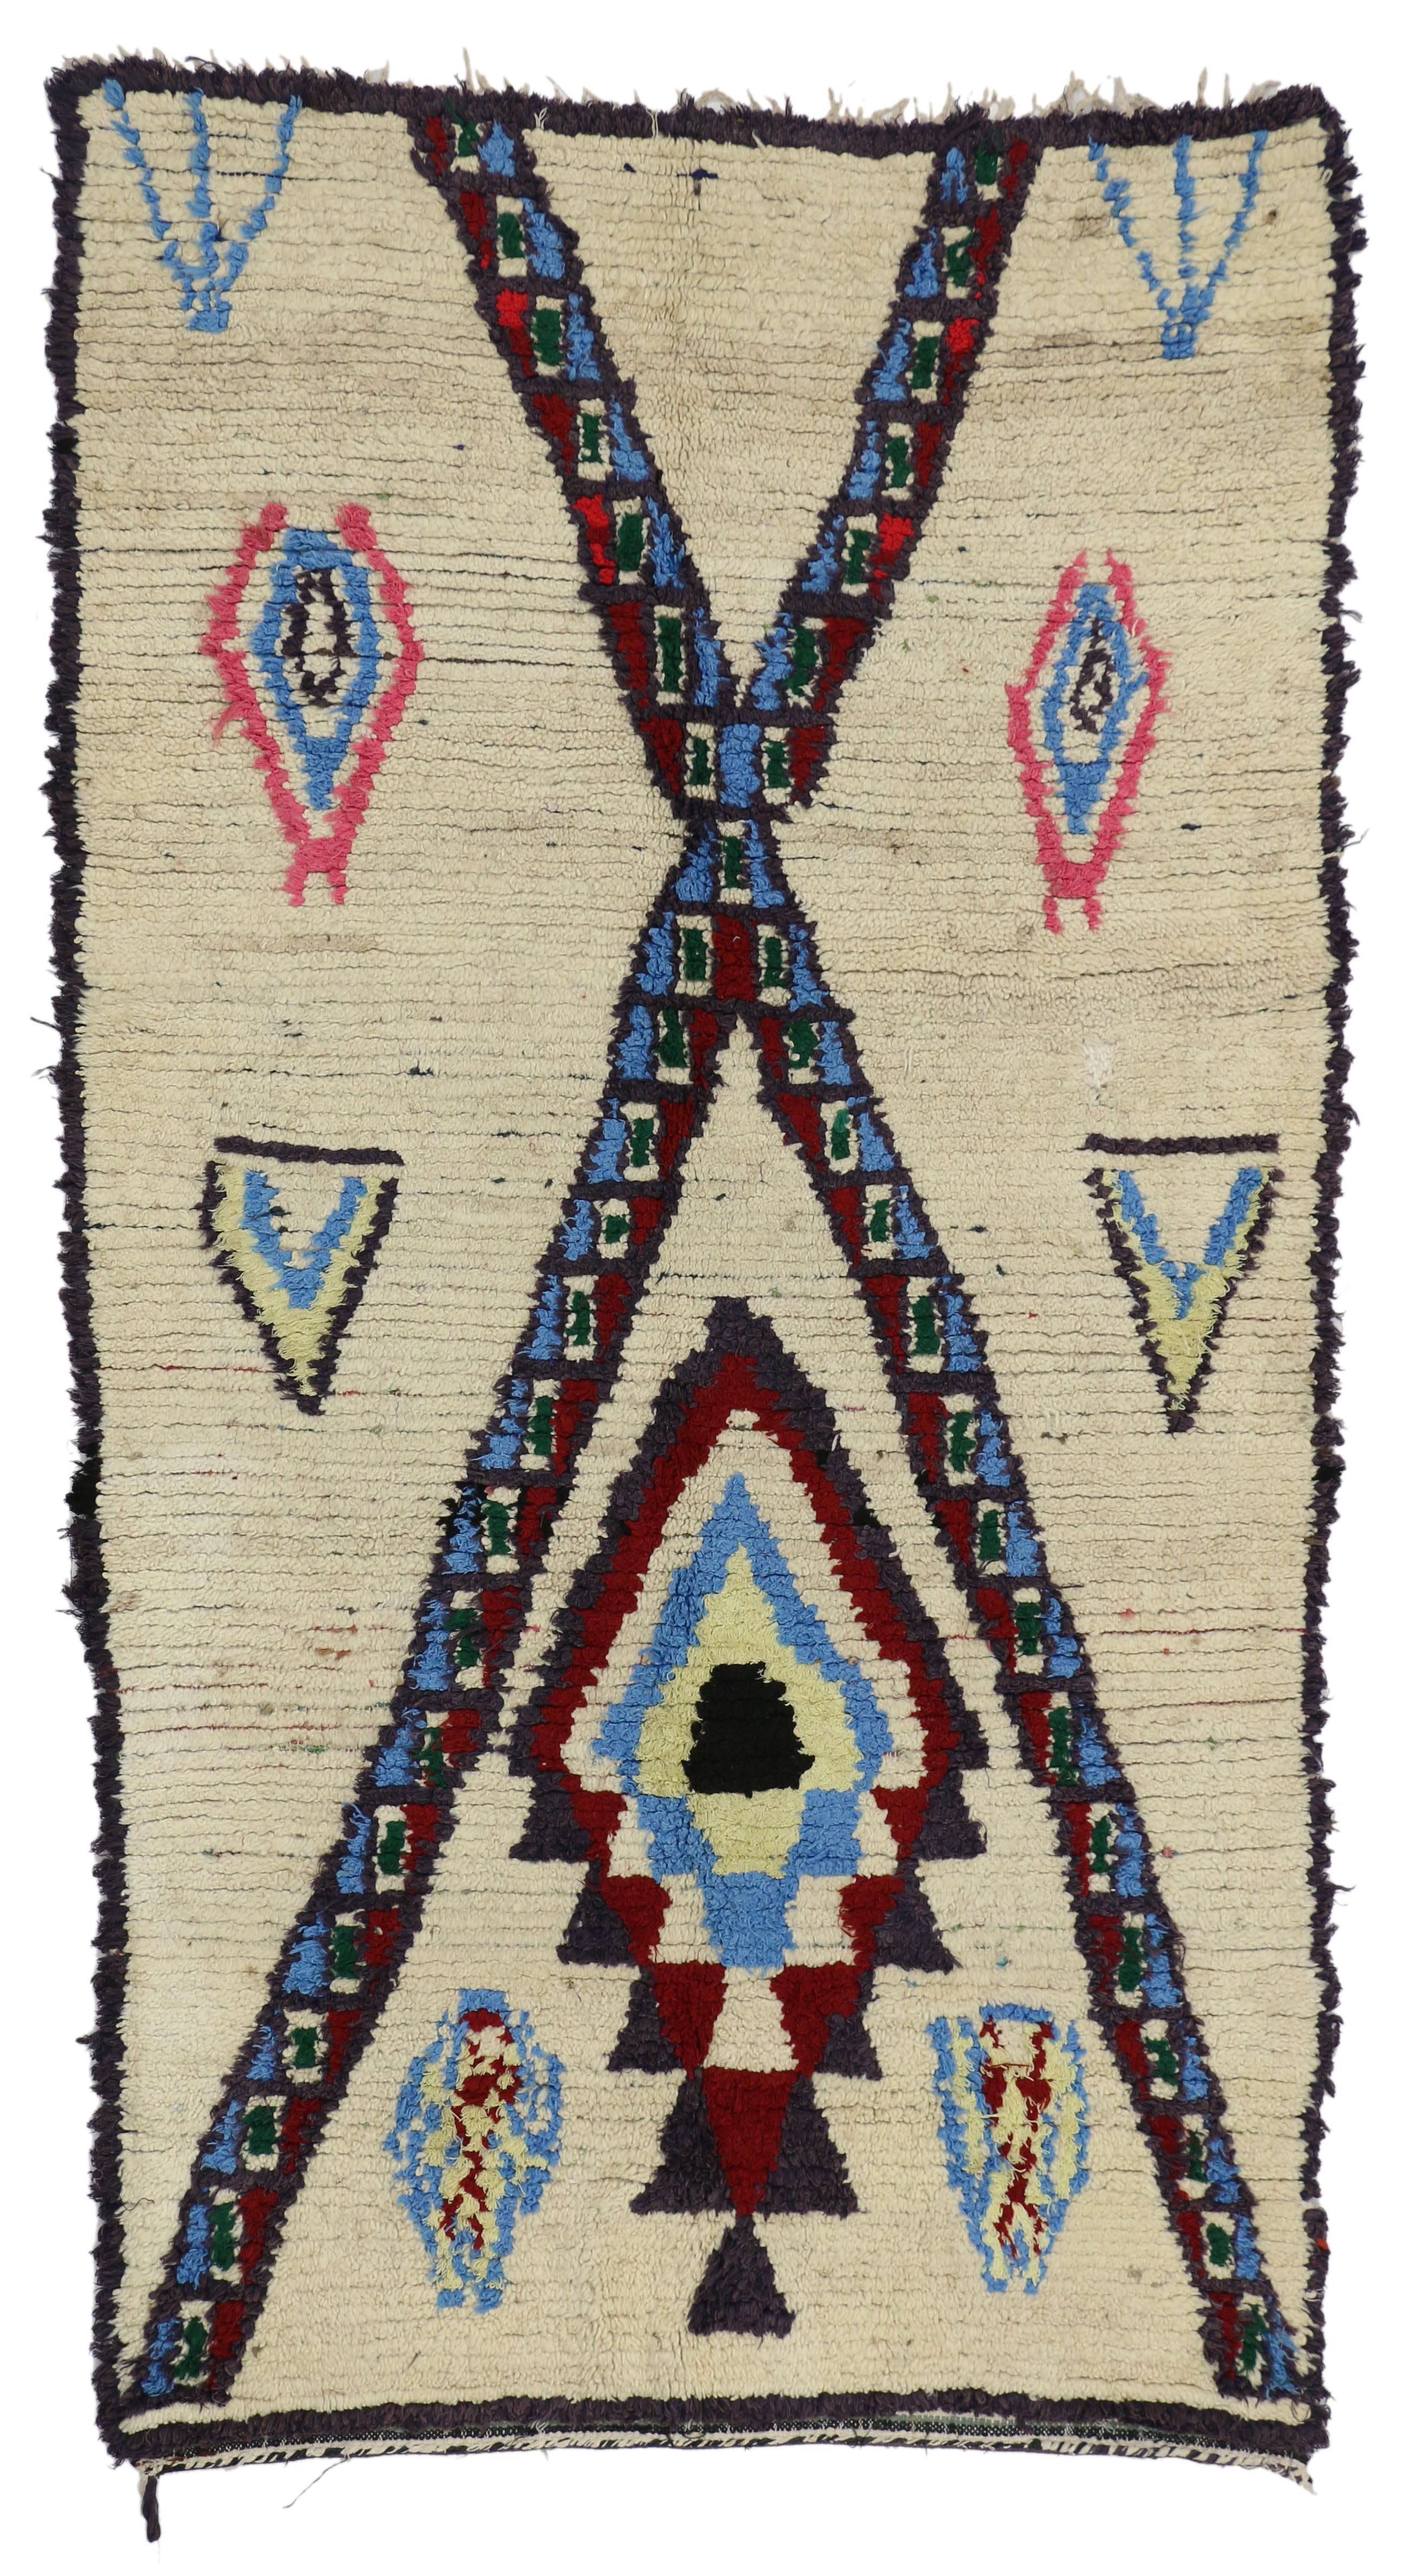 20620 Vintage Berber Moroccan Azilal Tribal Rug with Post-Modern Memphis Style. This Vintage Berber Moroccan Azilal rug with tribal style is an exceptional representation of Berber culture and symbolism. The Moroccan Azilal rugs are characterized by